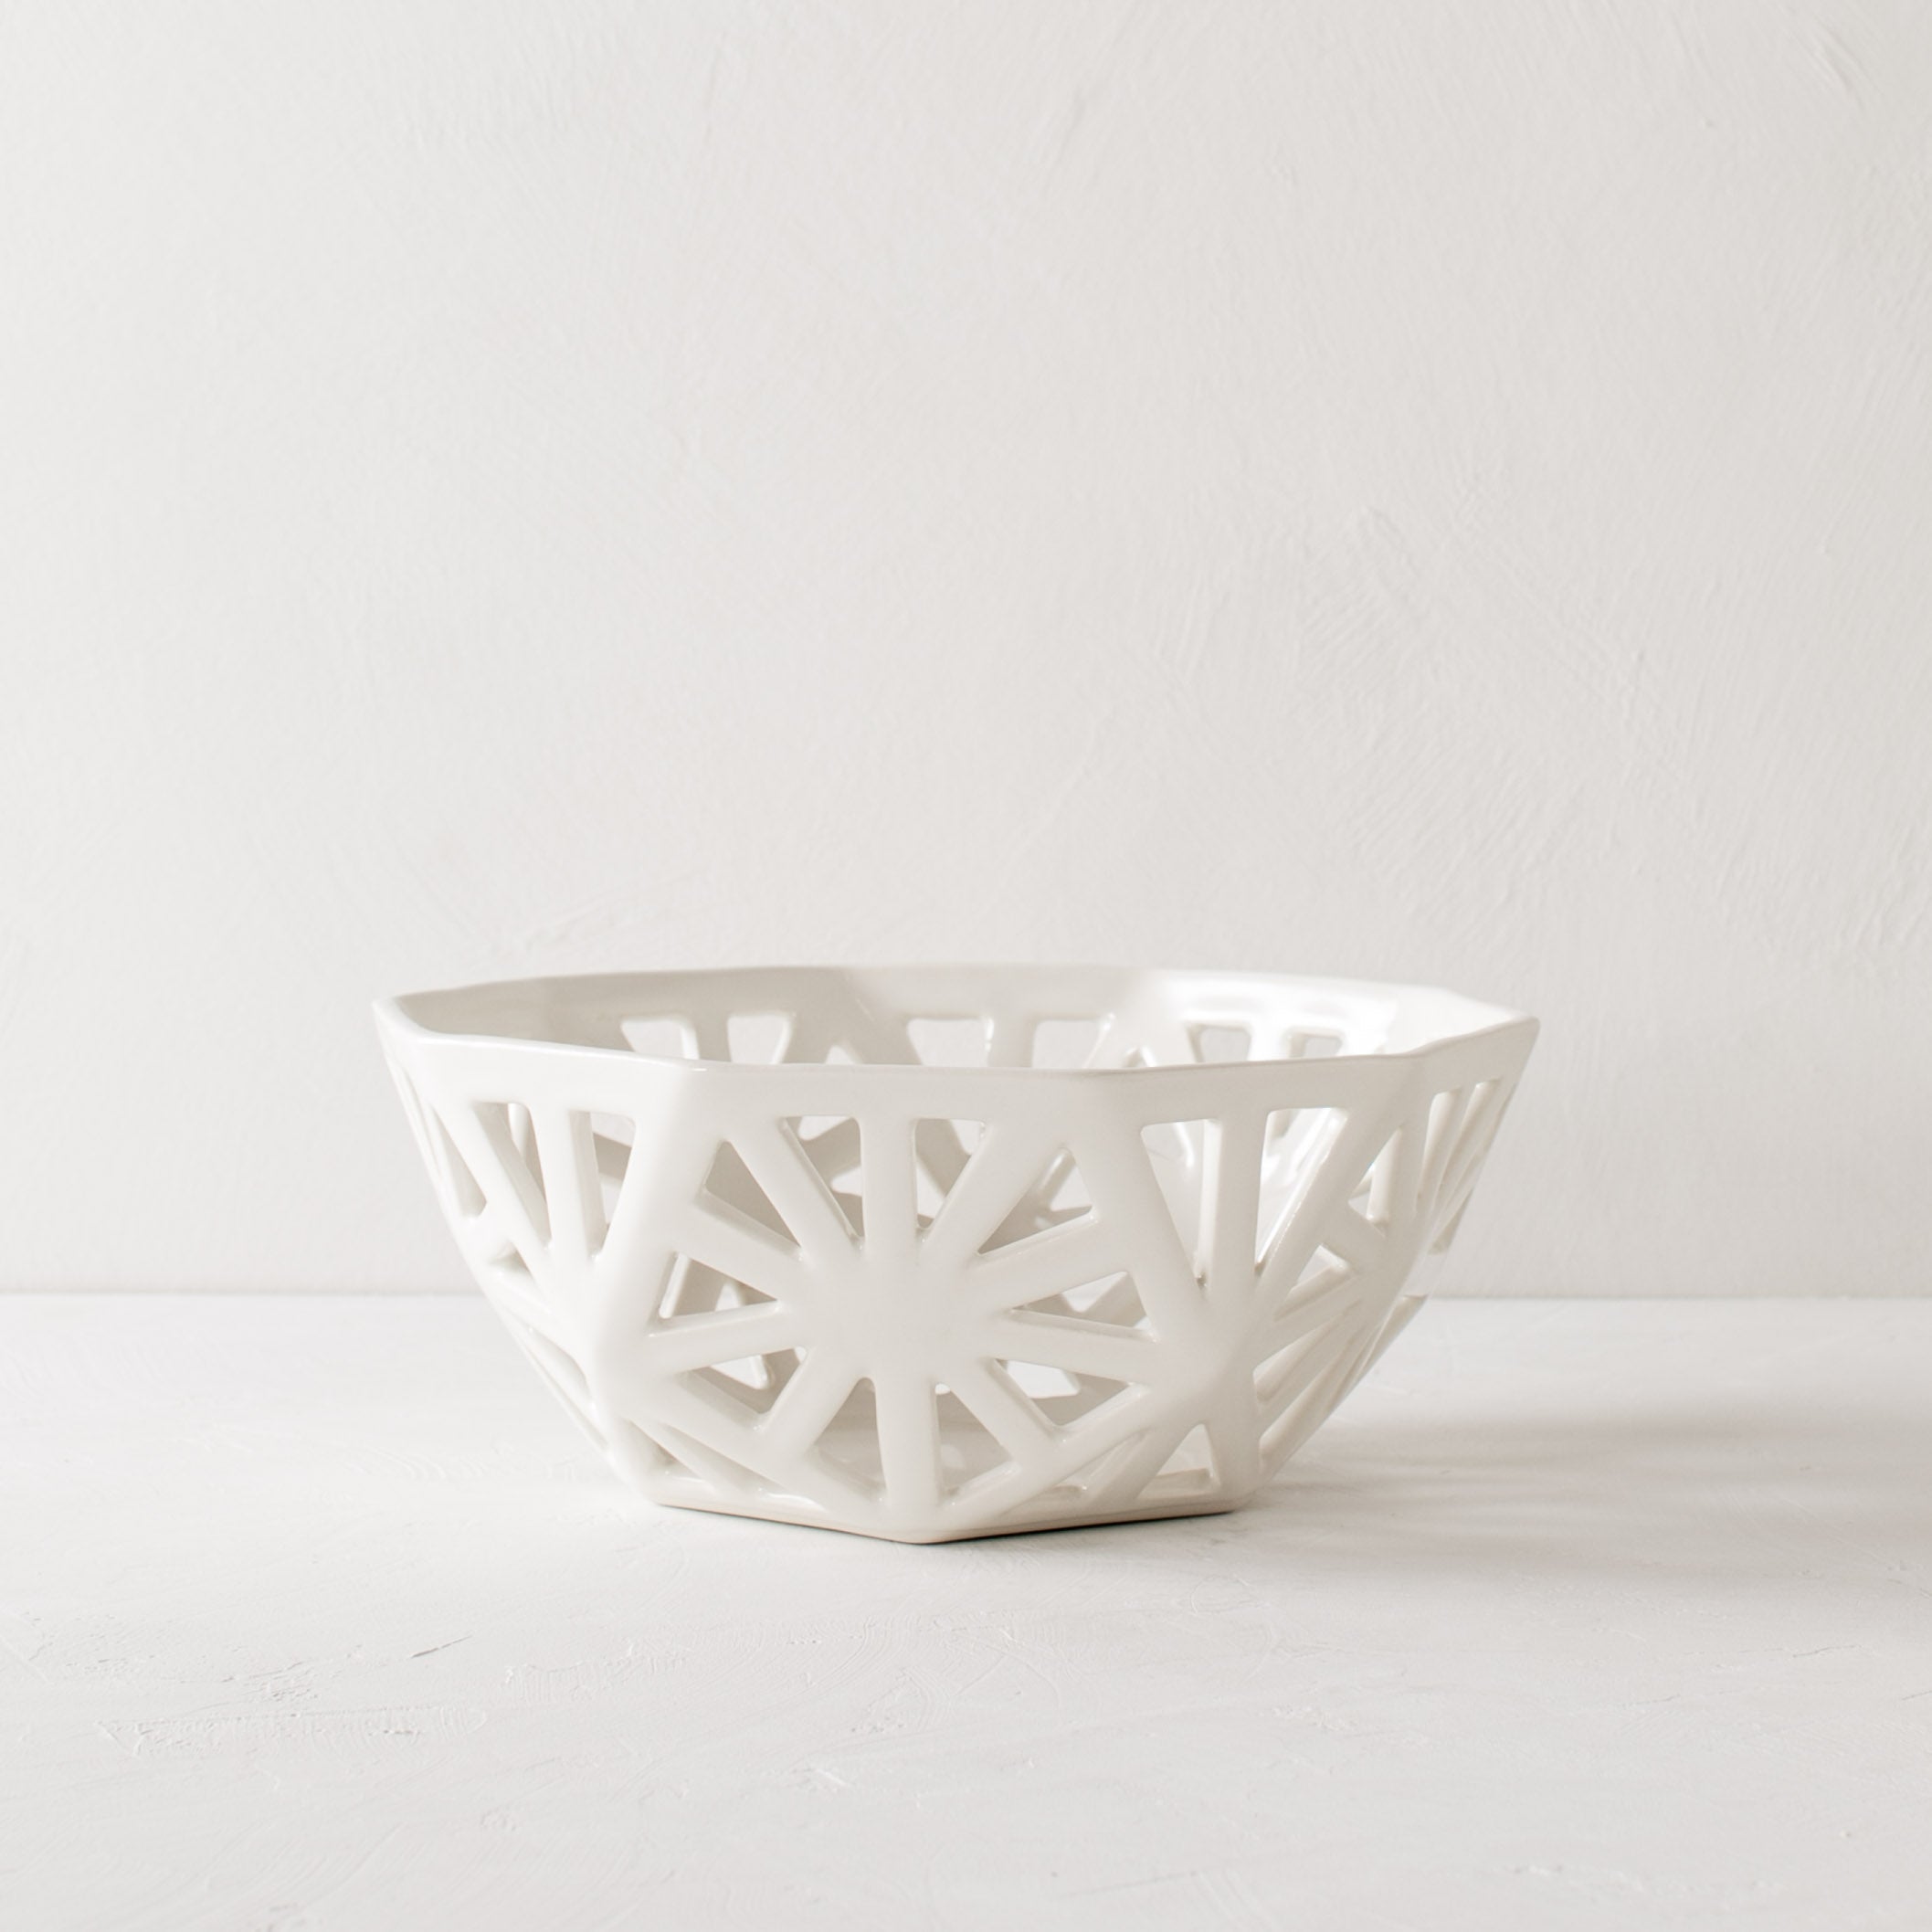 White geometric fruit bowl. Pentagon carved design with additional carved designs in the shape of slim right angle triangles. Designed and sold by Convivial Production, Kansas City Ceramics